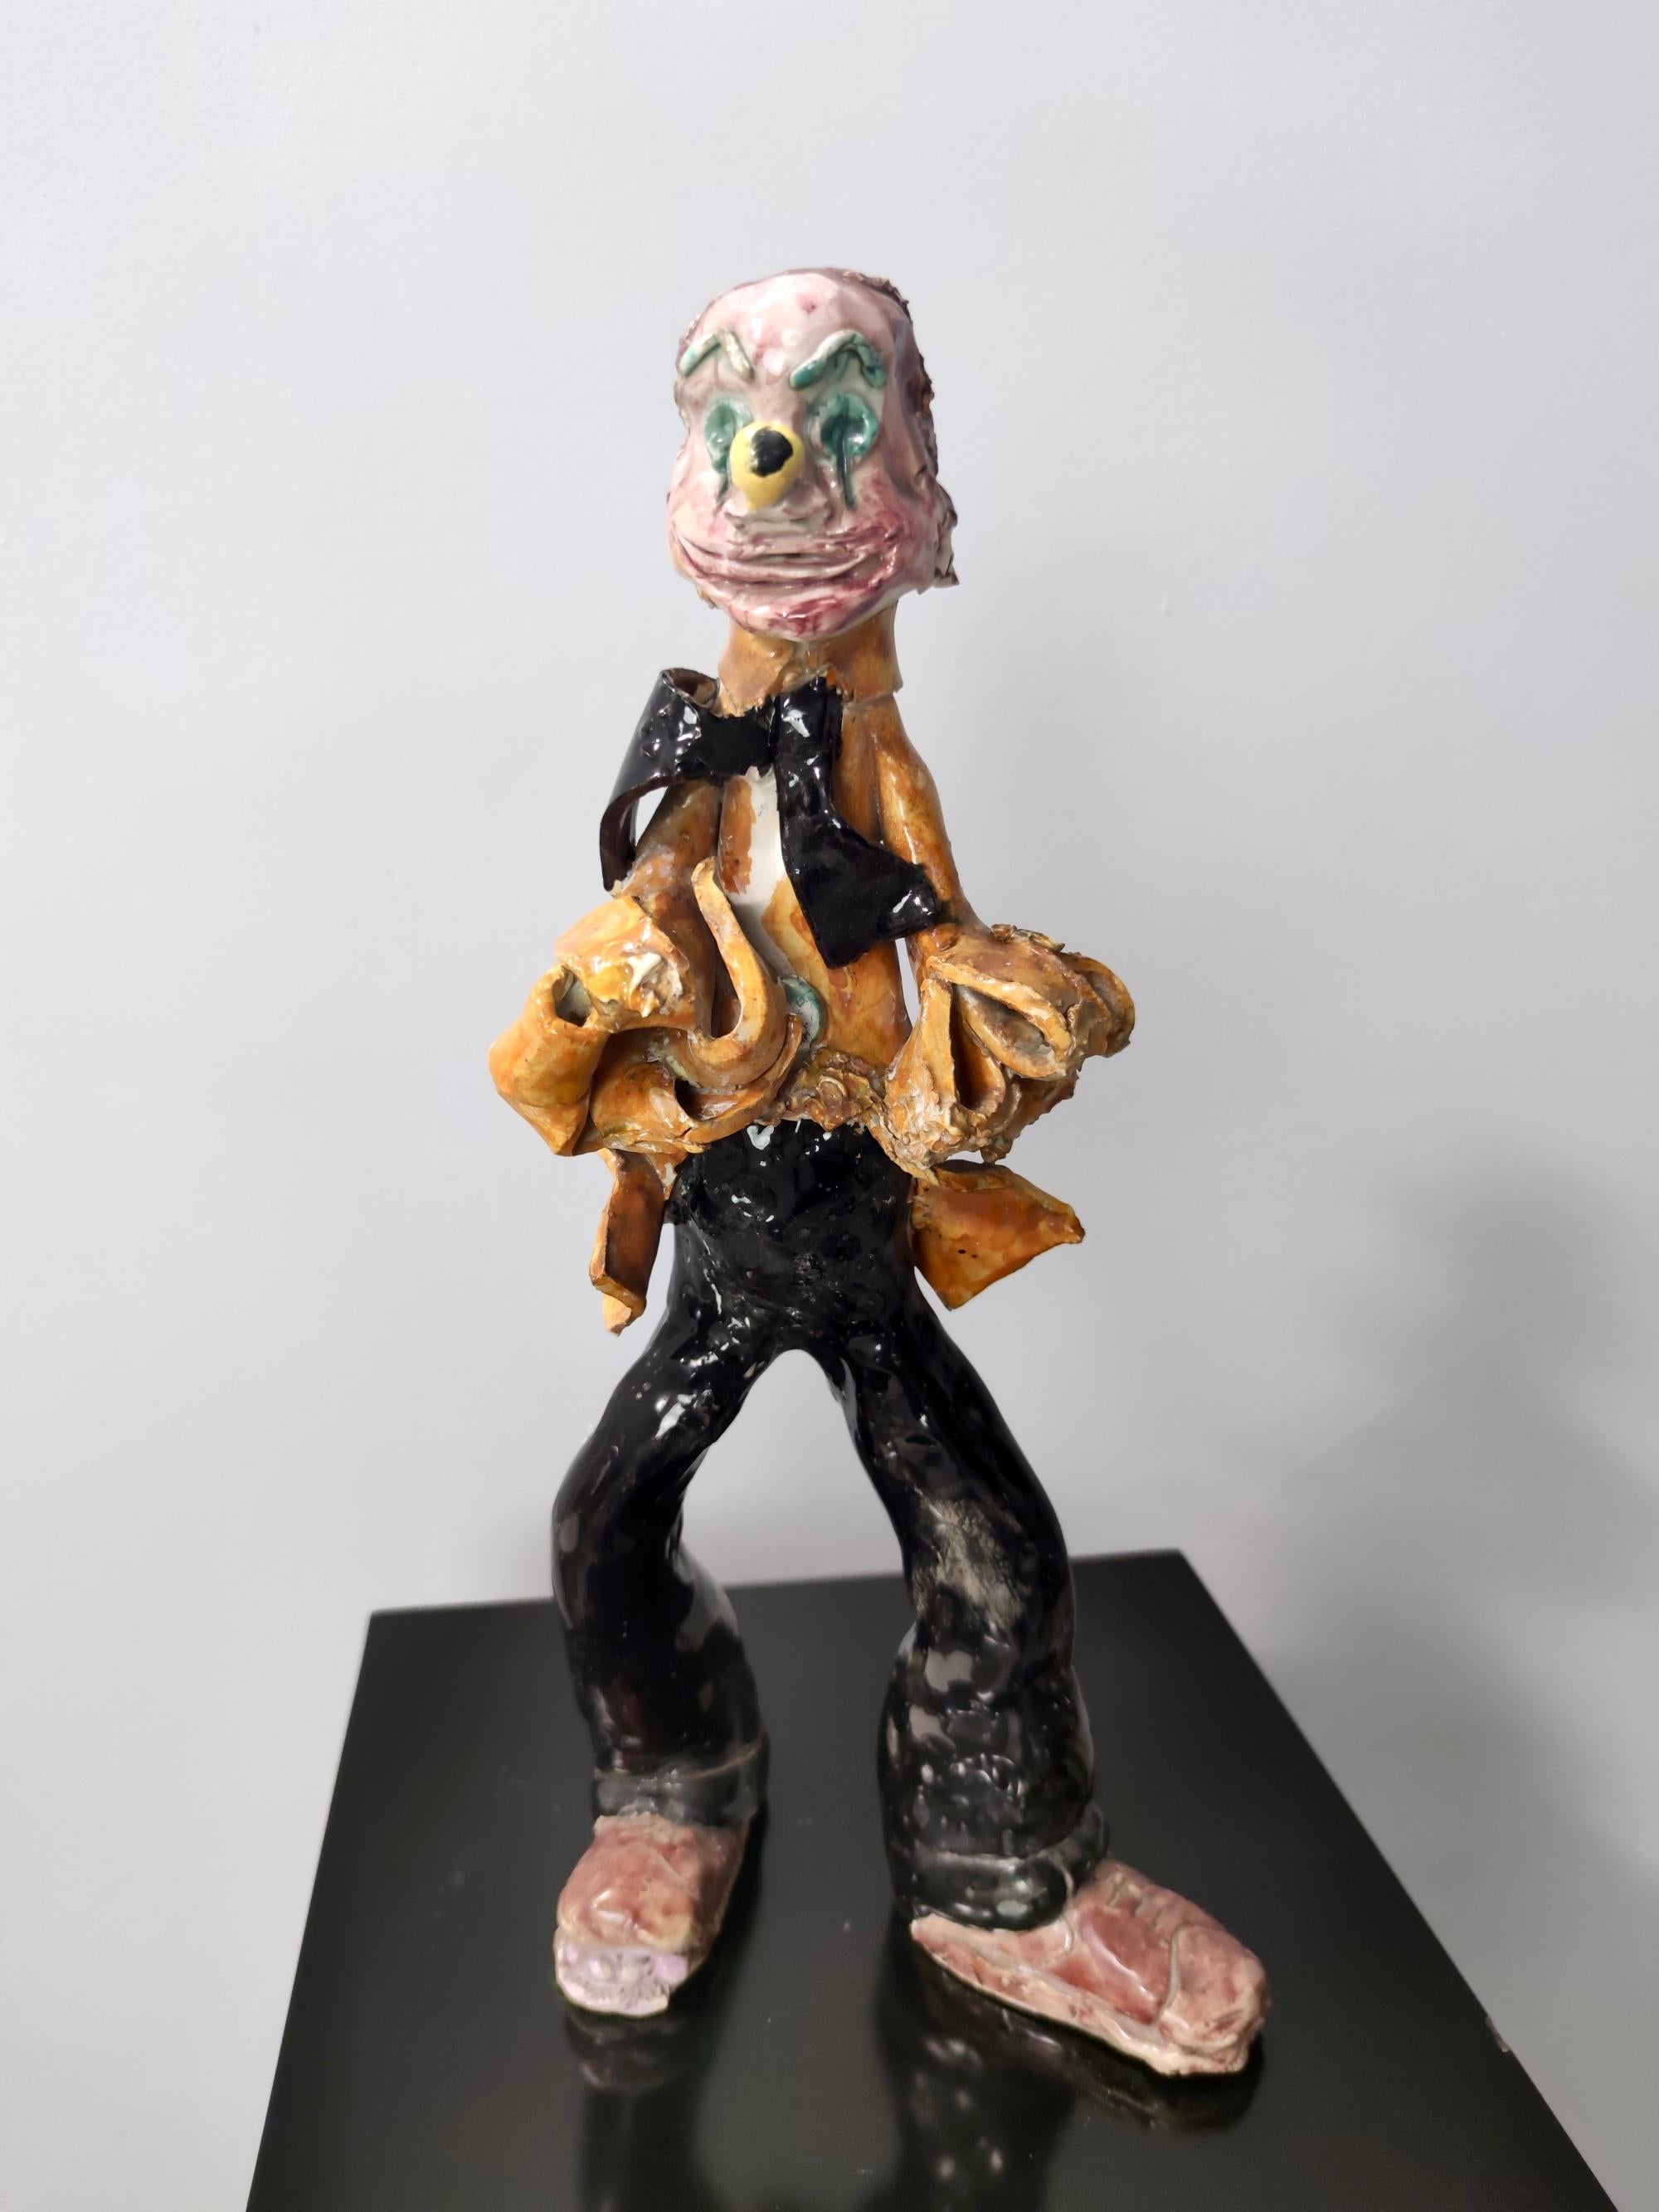 Vintage Lacquered Ceramic Decorative Clown Figure, Italy In Excellent Condition For Sale In Bresso, Lombardy